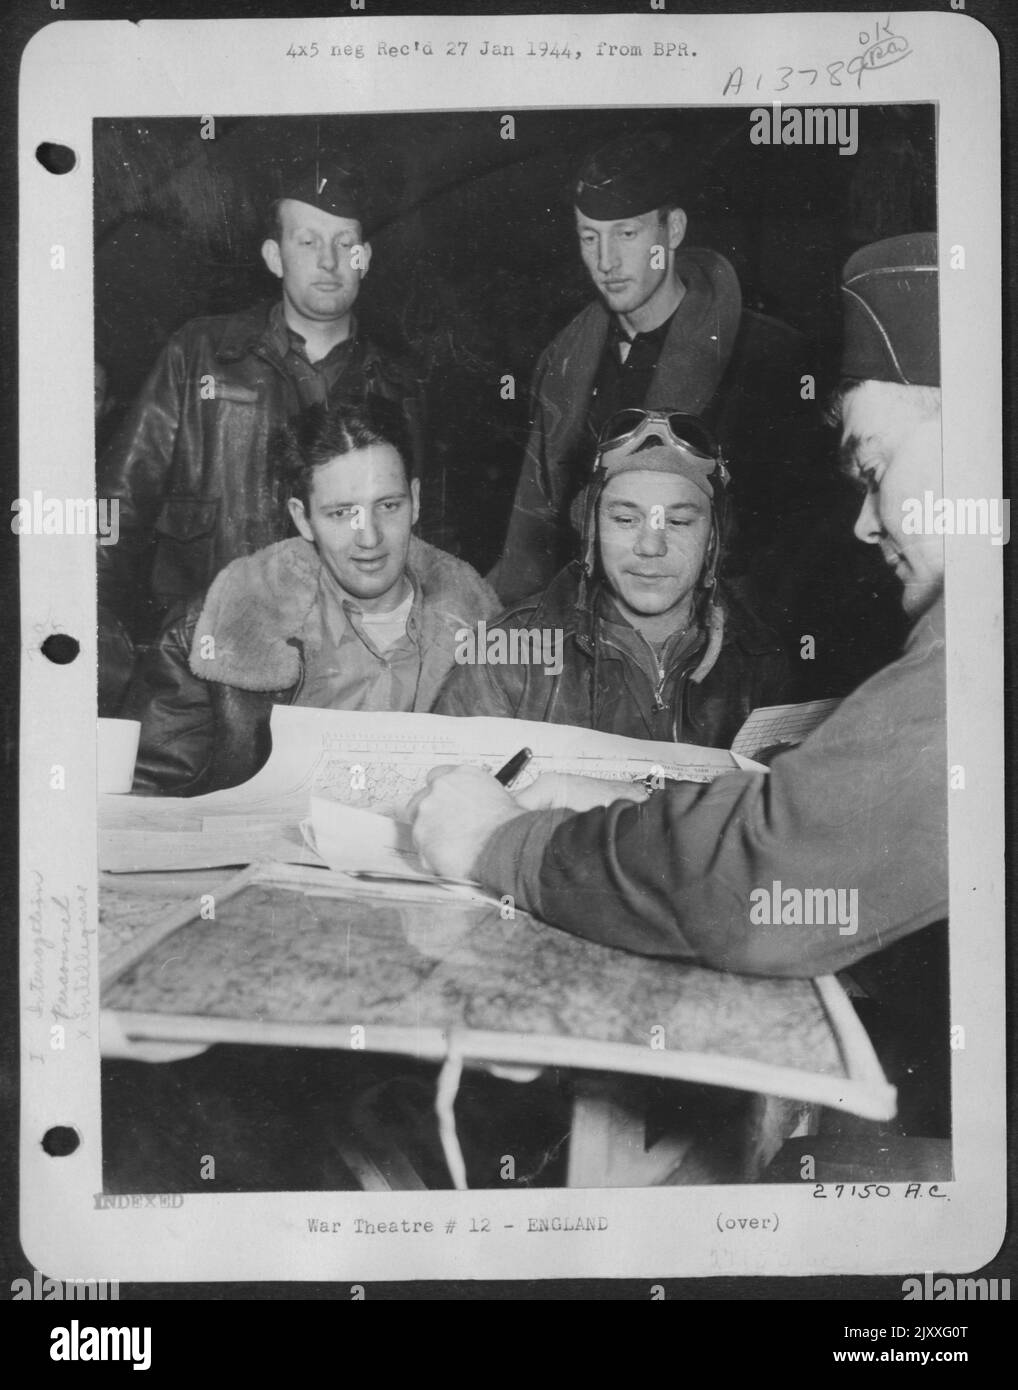 HIS TOUR OF MISSIONS COMPLETED: 1st Lt. Leroy Faringer (wearing goggles) sits for final interrogation on his return from a bombing mission over northwest Germany on 22 Dec. Lt. Faringer, 27, of Texarkana, Texas, is navigator of ofrtress "Demo Stock Photo